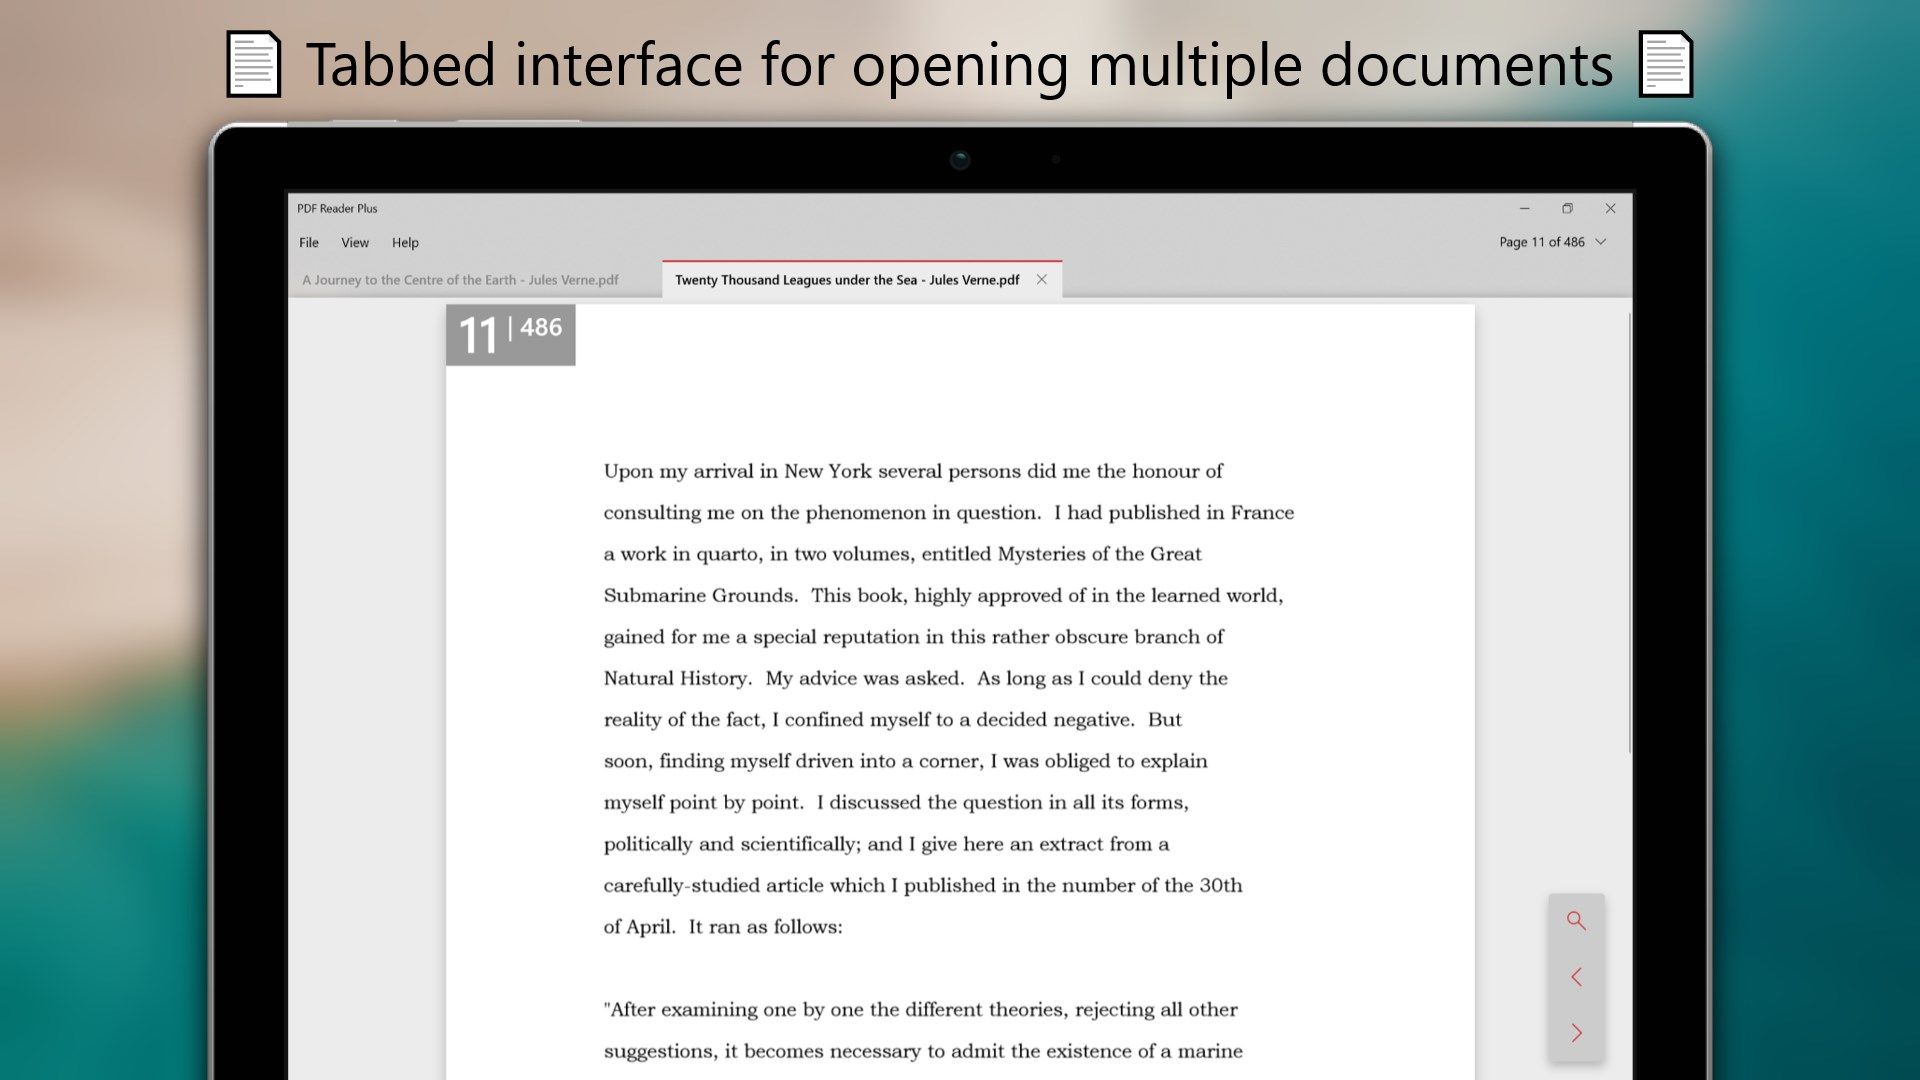 Tabbed interface for opening multiple documents